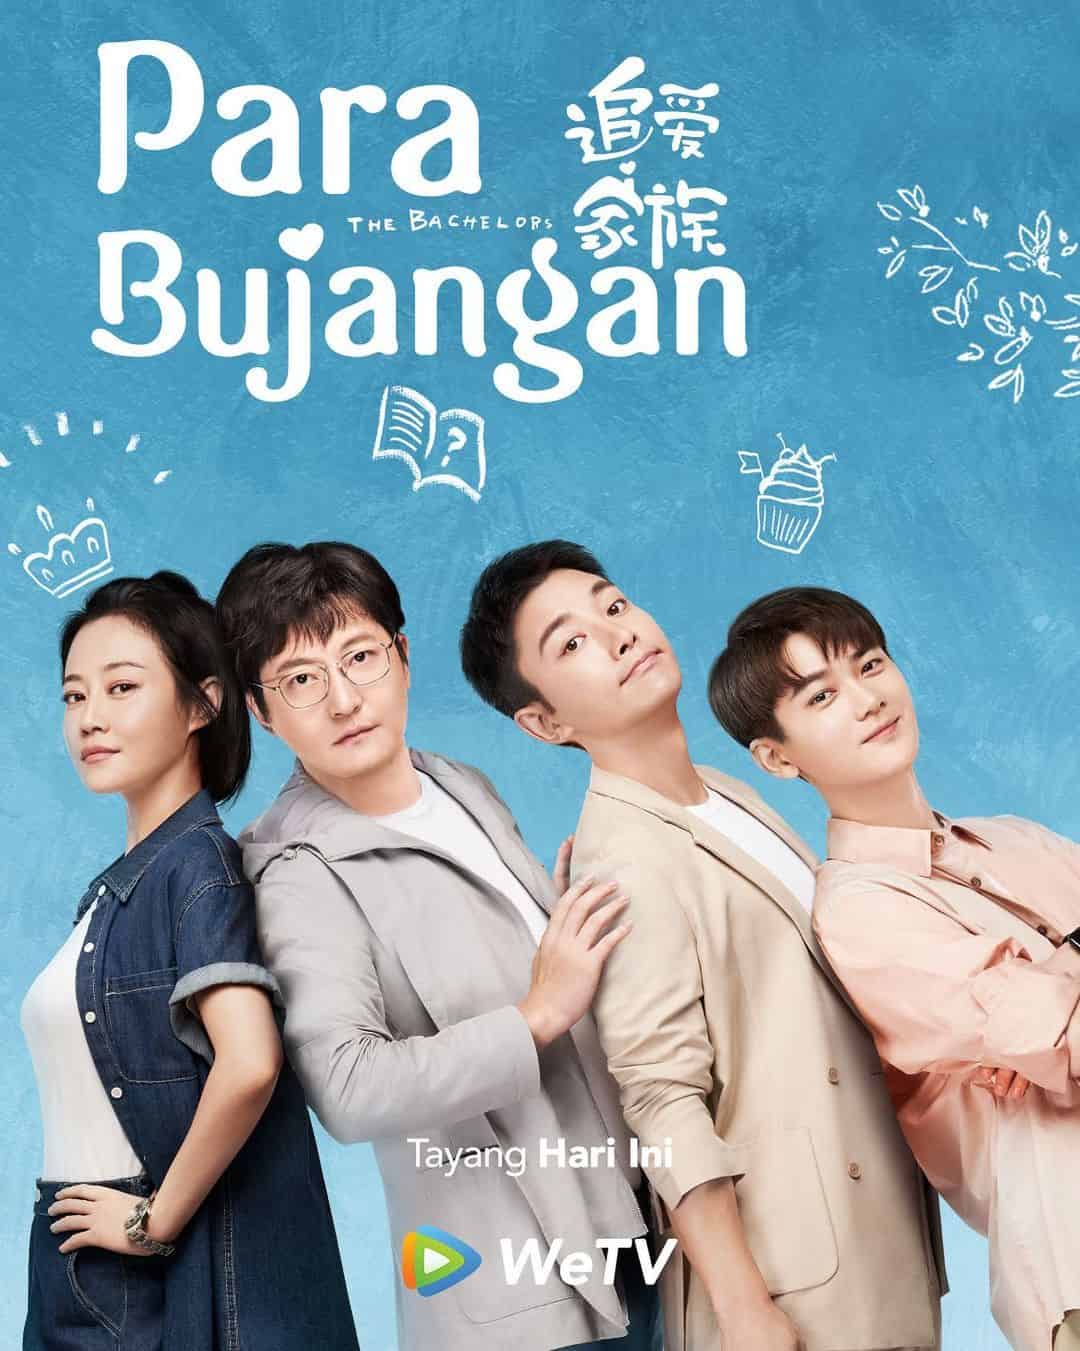 The Bachelors - Sinopsis, Pemain, OST, Episode, Review